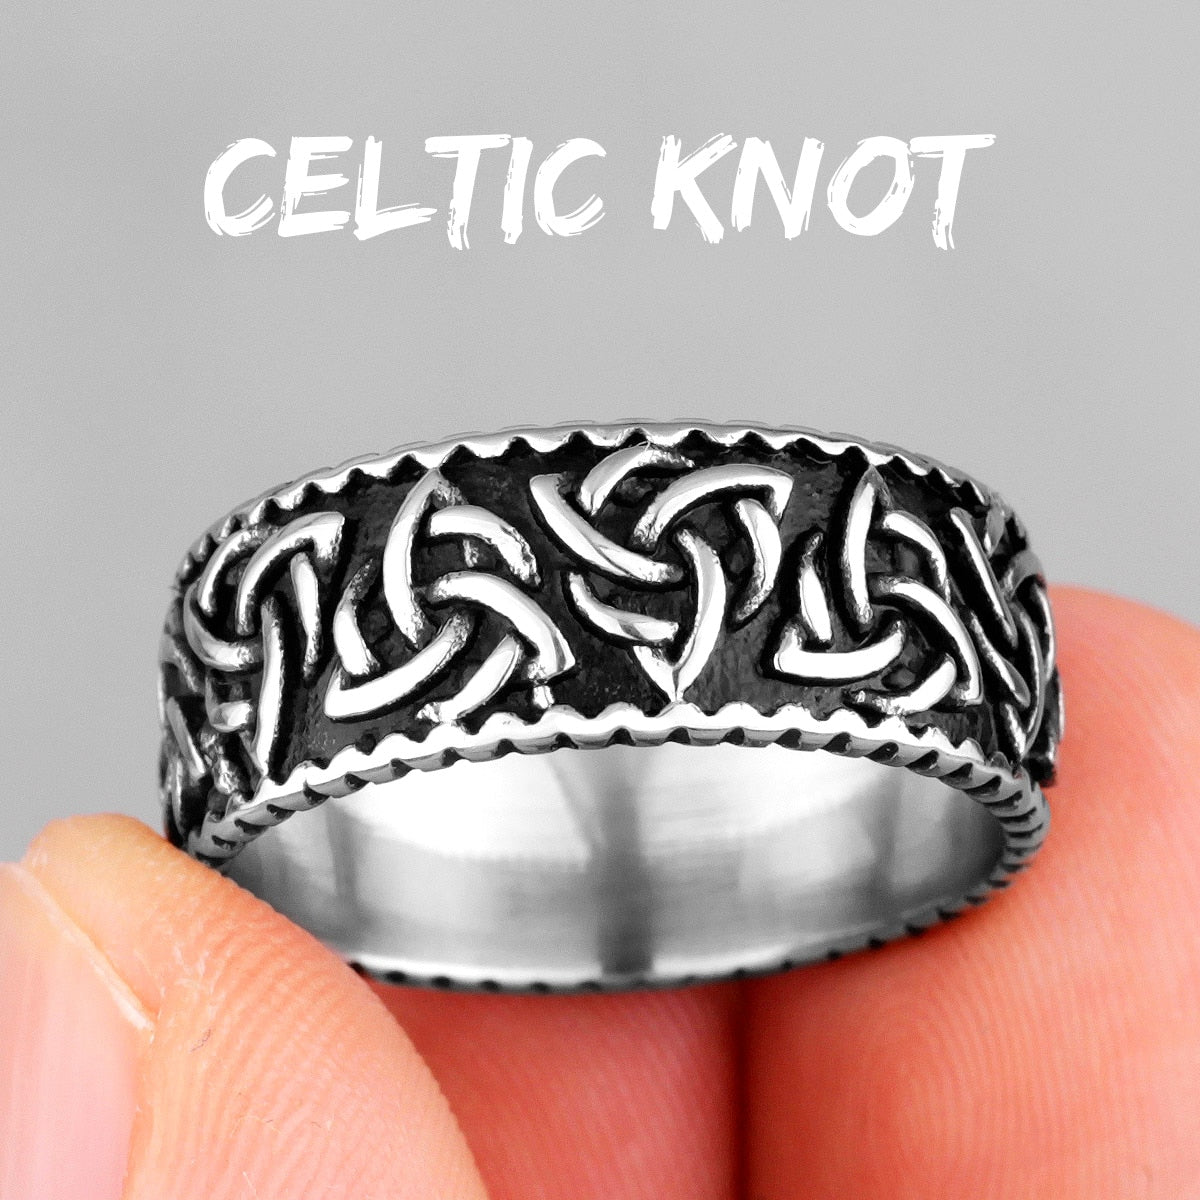 Celtic Knot Stainless Steel Rings - 5 styles